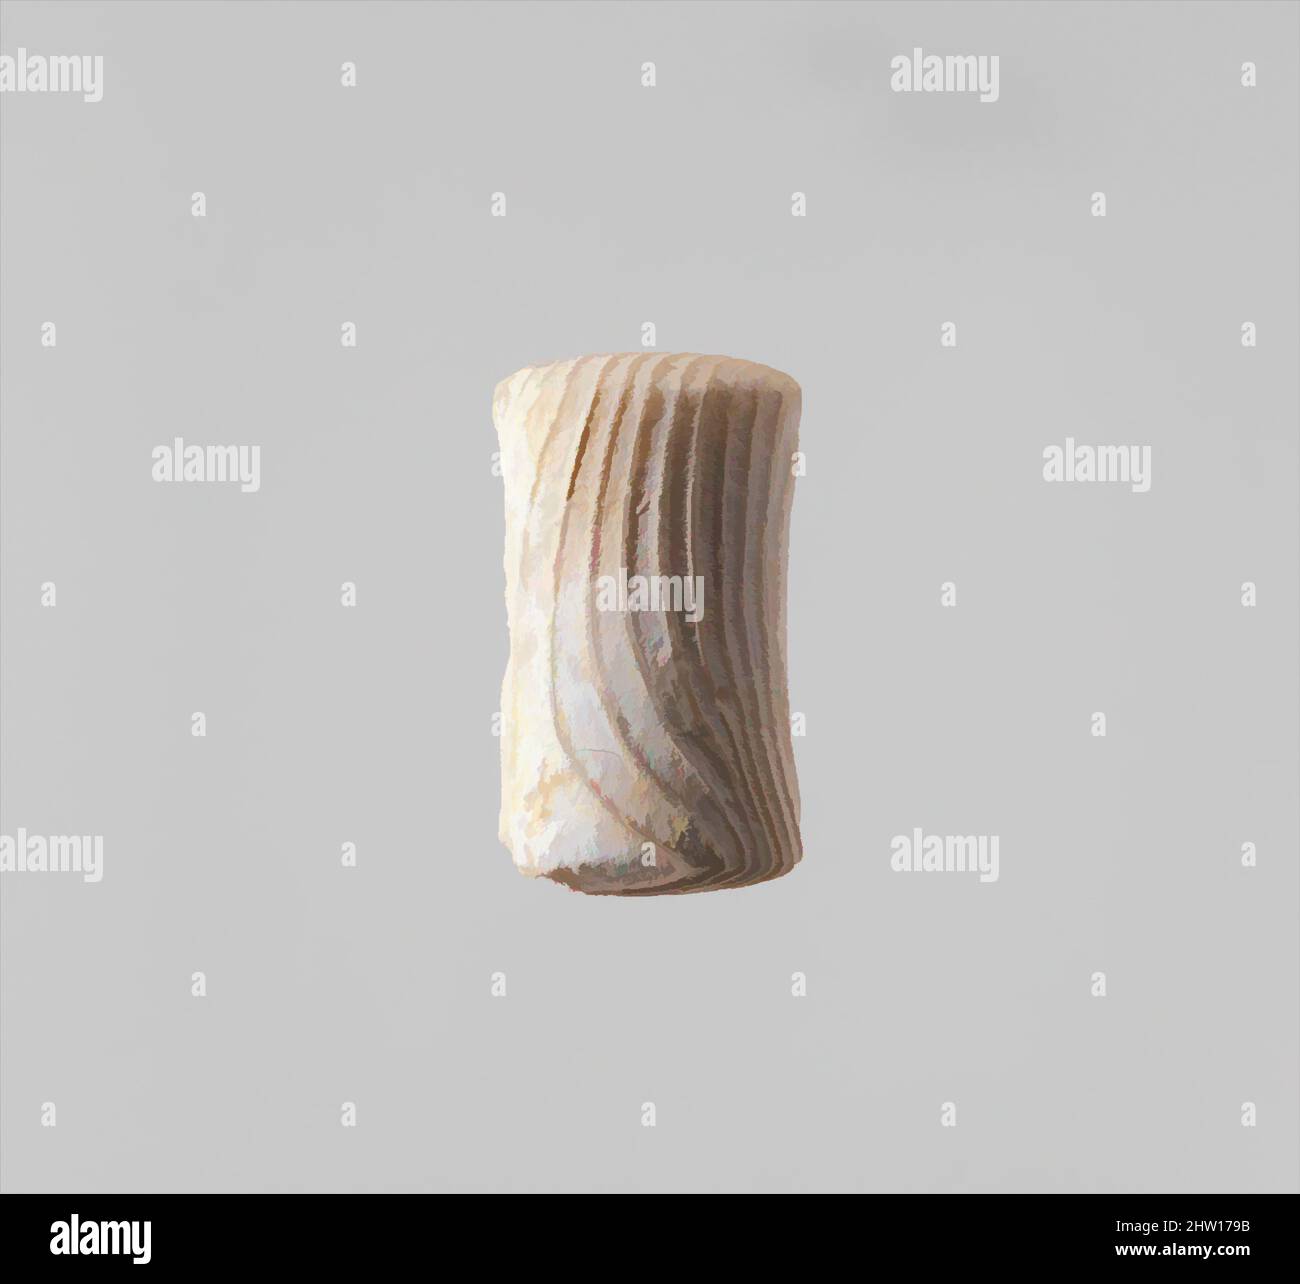 Art inspired by Shell pestle/polisher, Early Cycladic II, ca. 2700–2400 B.C., Cycladic, Spondylus shell (aragonite), 3/4 × 7/16 in. (2 × 1.1 cm), Miscellaneous-Shell, Small pestle or polisher carved from a piece of shell, Classic works modernized by Artotop with a splash of modernity. Shapes, color and value, eye-catching visual impact on art. Emotions through freedom of artworks in a contemporary way. A timeless message pursuing a wildly creative new direction. Artists turning to the digital medium and creating the Artotop NFT Stock Photo